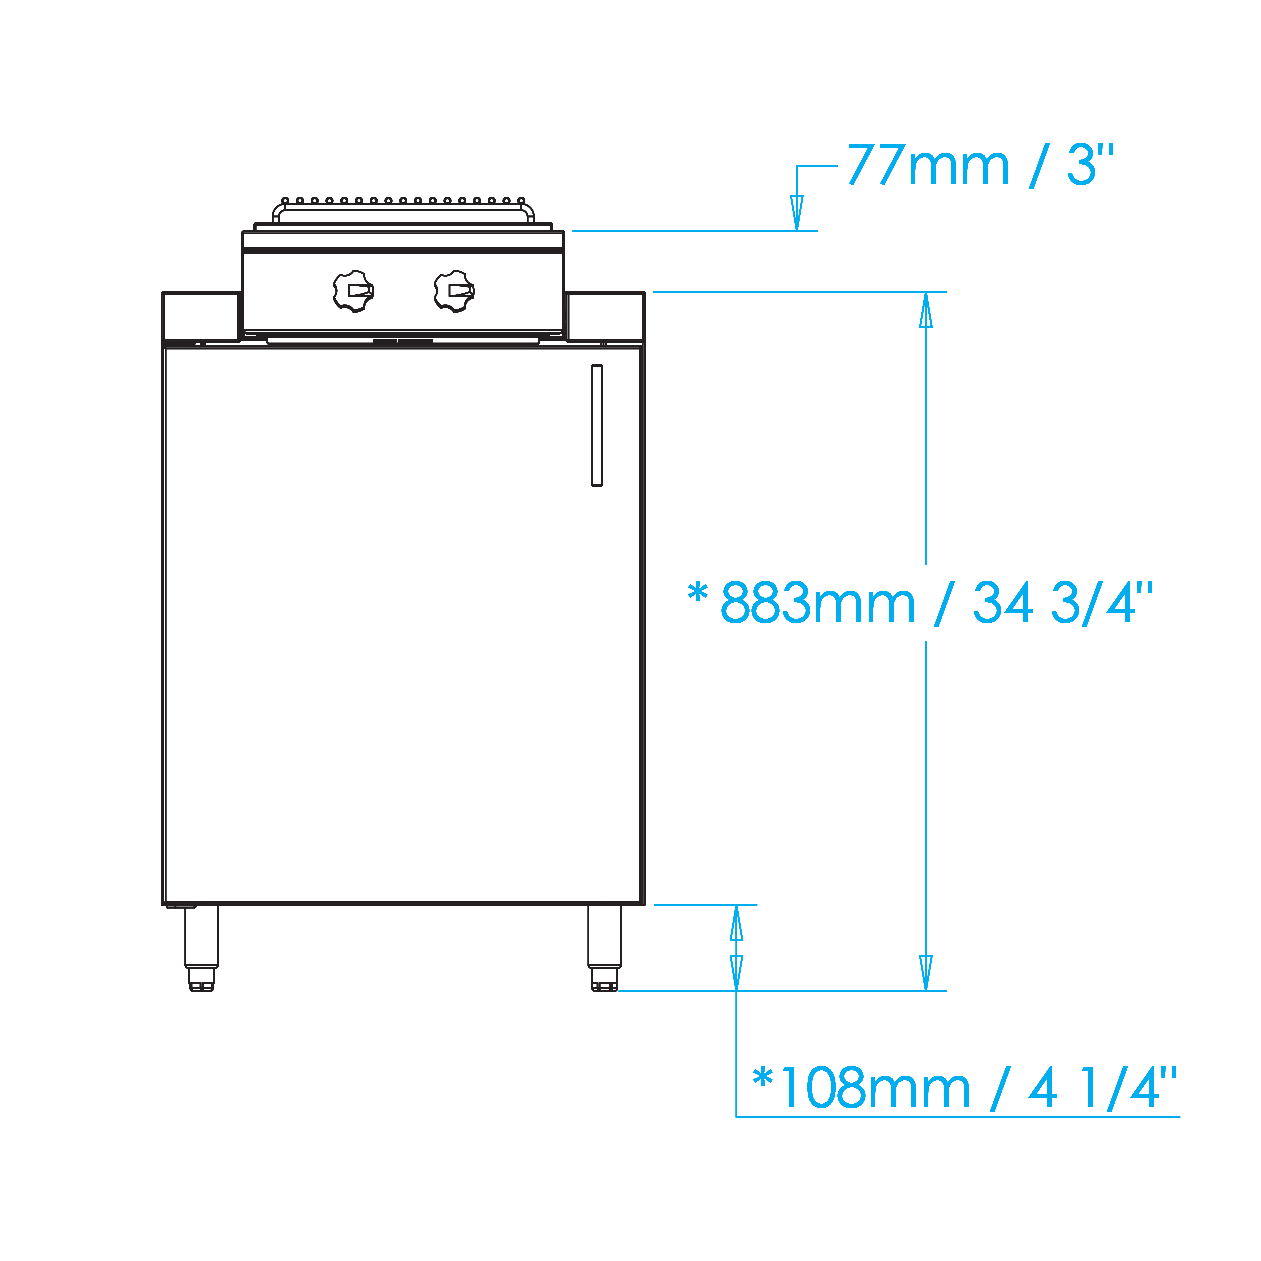 Signature 24-inch Cooktop Cabinet Dimensions Image